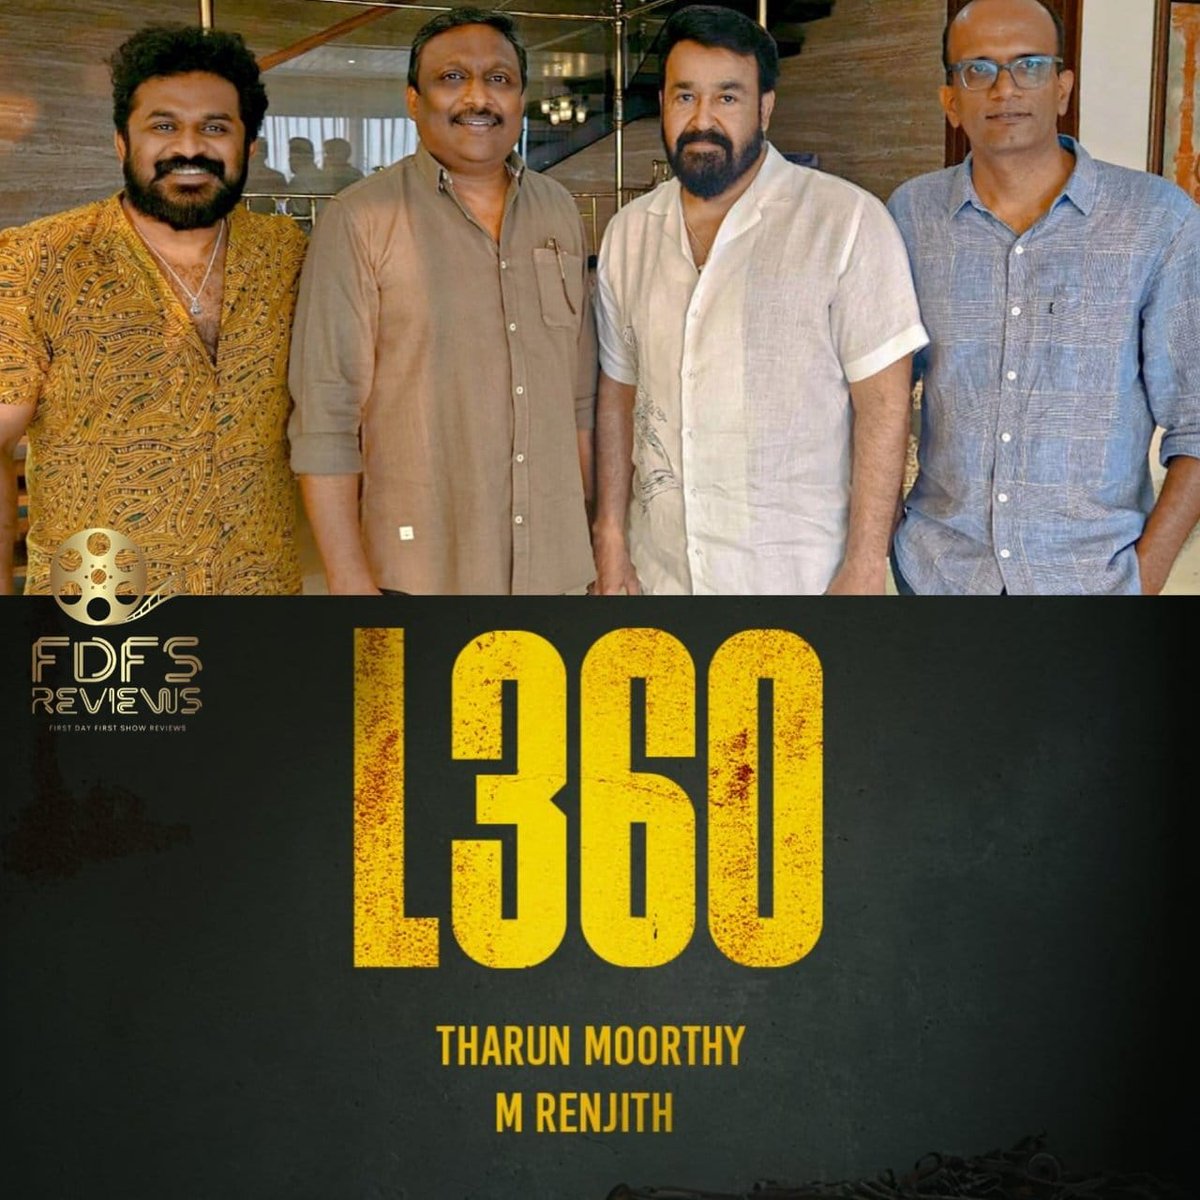 #L360 Shoot Starts From April 22!🔥👏 #Mohanlal - #TharunMoorthy